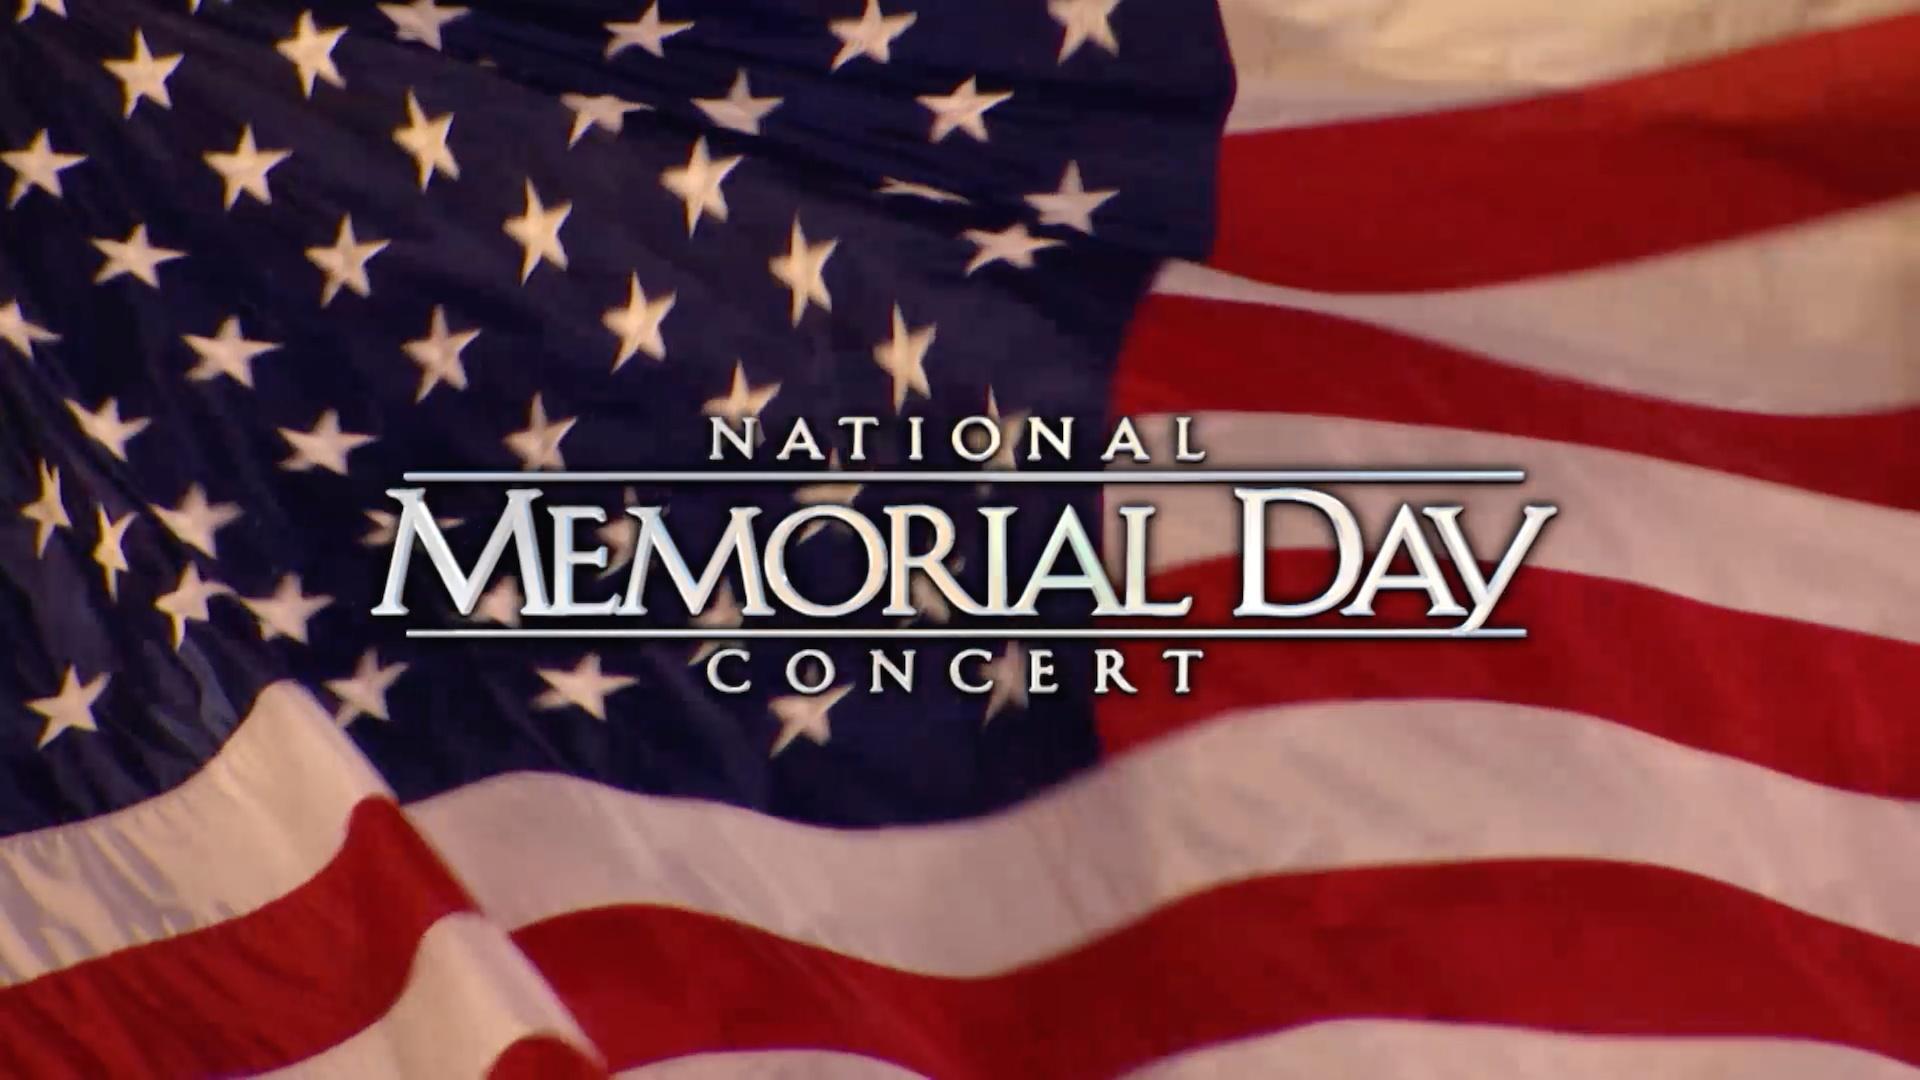 2018 National Memorial Day Concert Featured Highlights National